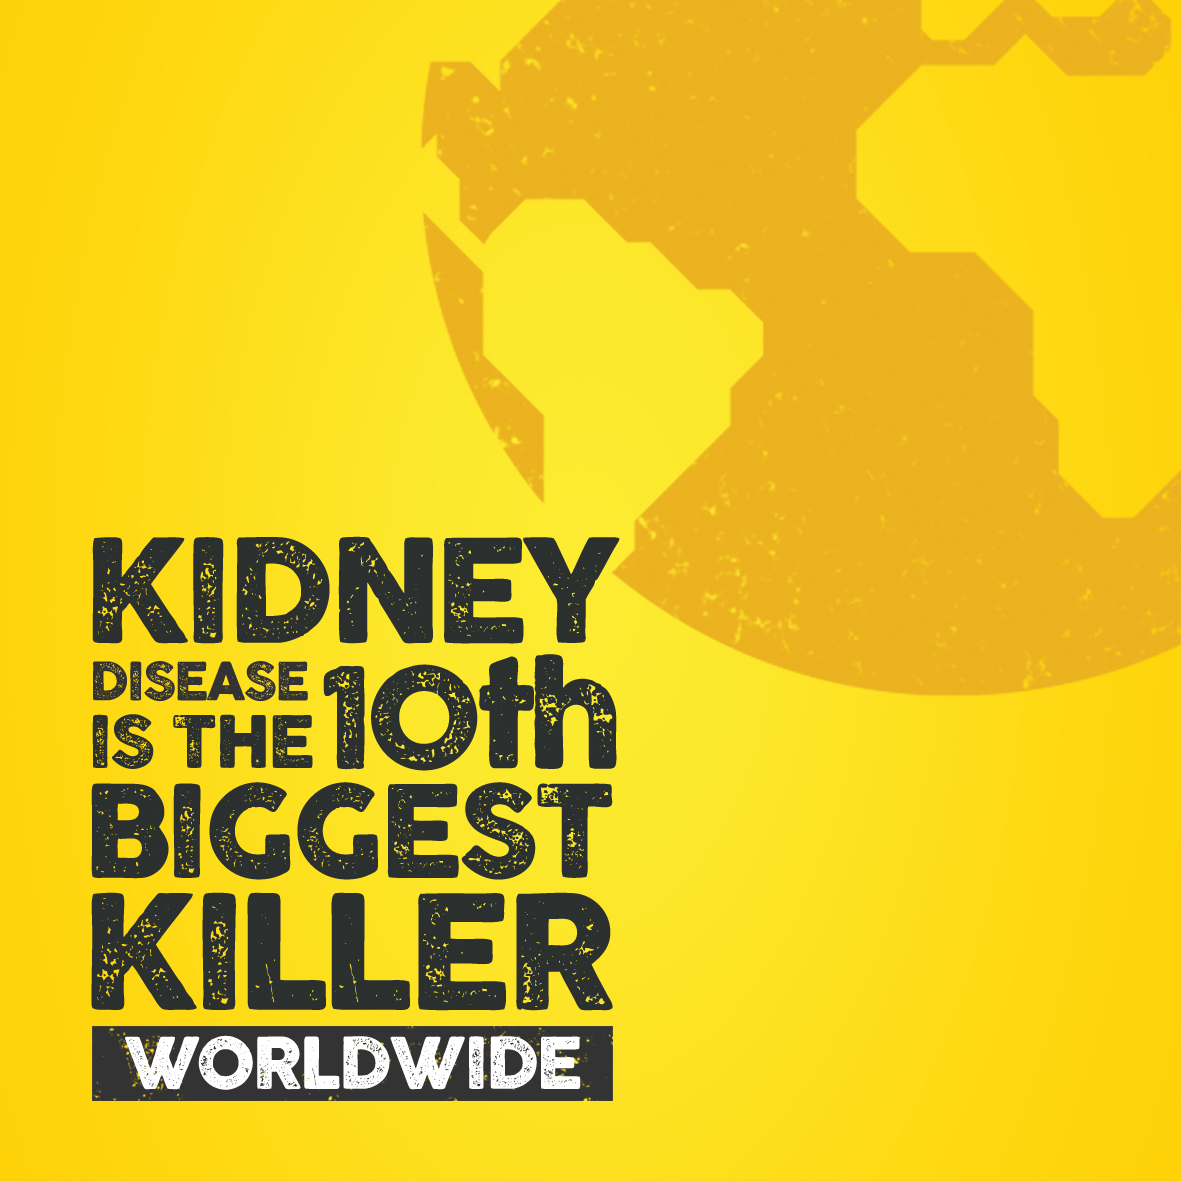 An eye-opening reality😧 Did you know that over 850 million people worldwide are impacted by kidney disease, with many unaware of their condition? Learn how to spot the signs and symptoms via worldkidneyday.co.uk/are-you-kidney… #MyKidneyHero #WorldKidneyDay #KidneysMatter